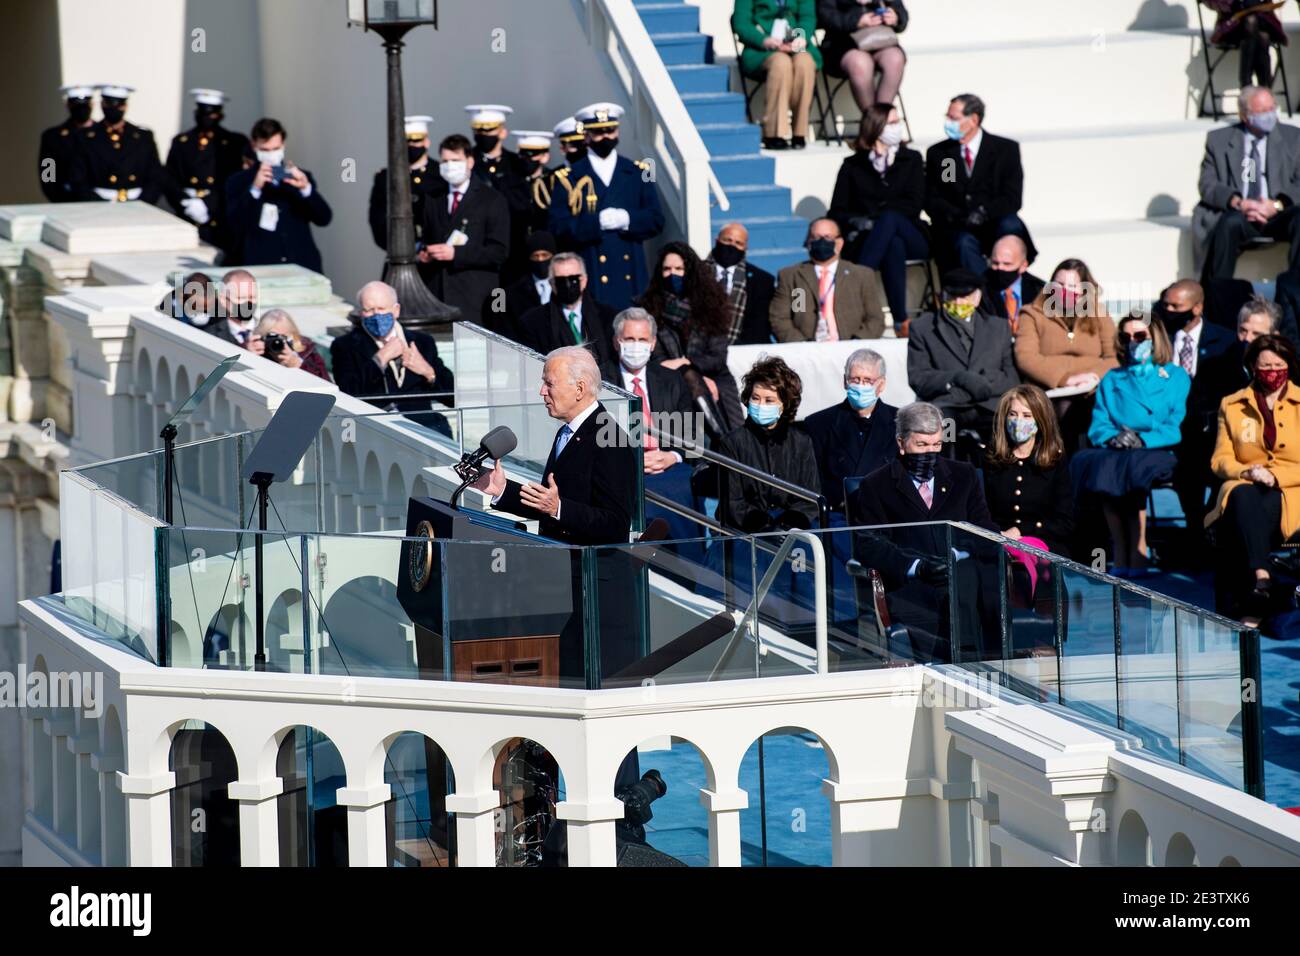 Washington, USA. 20th Jan, 2021. U.S. President Joe Biden (Front) delivers his inaugural address after he was sworn in as the 46th President of the United States in Washington, DC, the United States, on Jan. 20, 2021. At an unusual inauguration closed to public due to the still raging coronavirus pandemic, U.S. President-elect Joe Biden was sworn in as the 46th President of the United States on Wednesday at the West Front of the Capitol, which was breached two weeks ago by violent protesters trying to overturn his election victory. Credit: Liu Jie/Xinhua/Alamy Live News Stock Photo